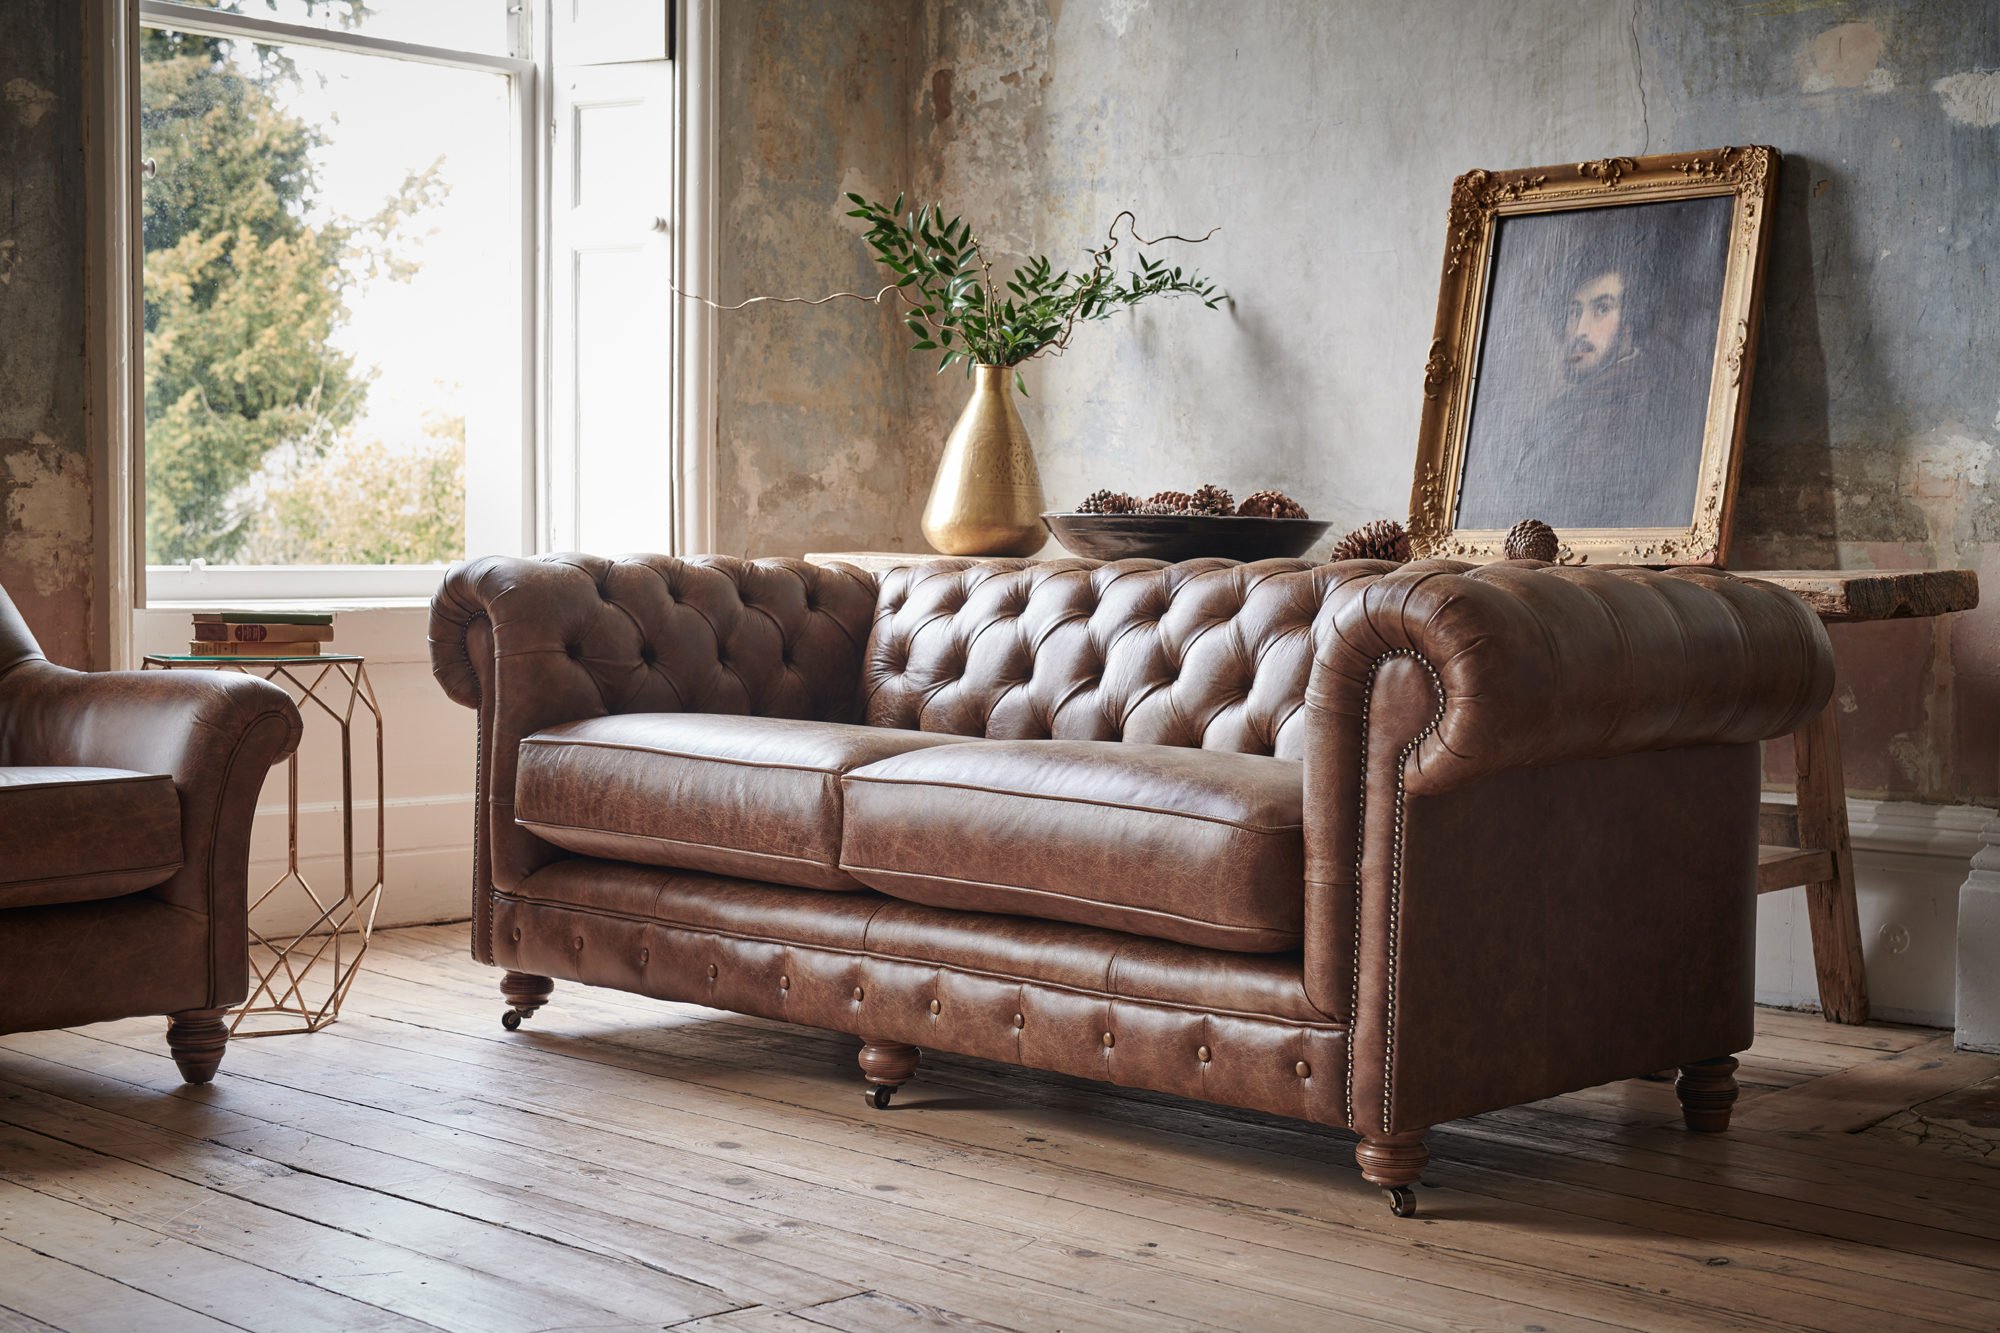 Chesterfield Leather Sofa, How To Spot A Real Chesterfield Sofa